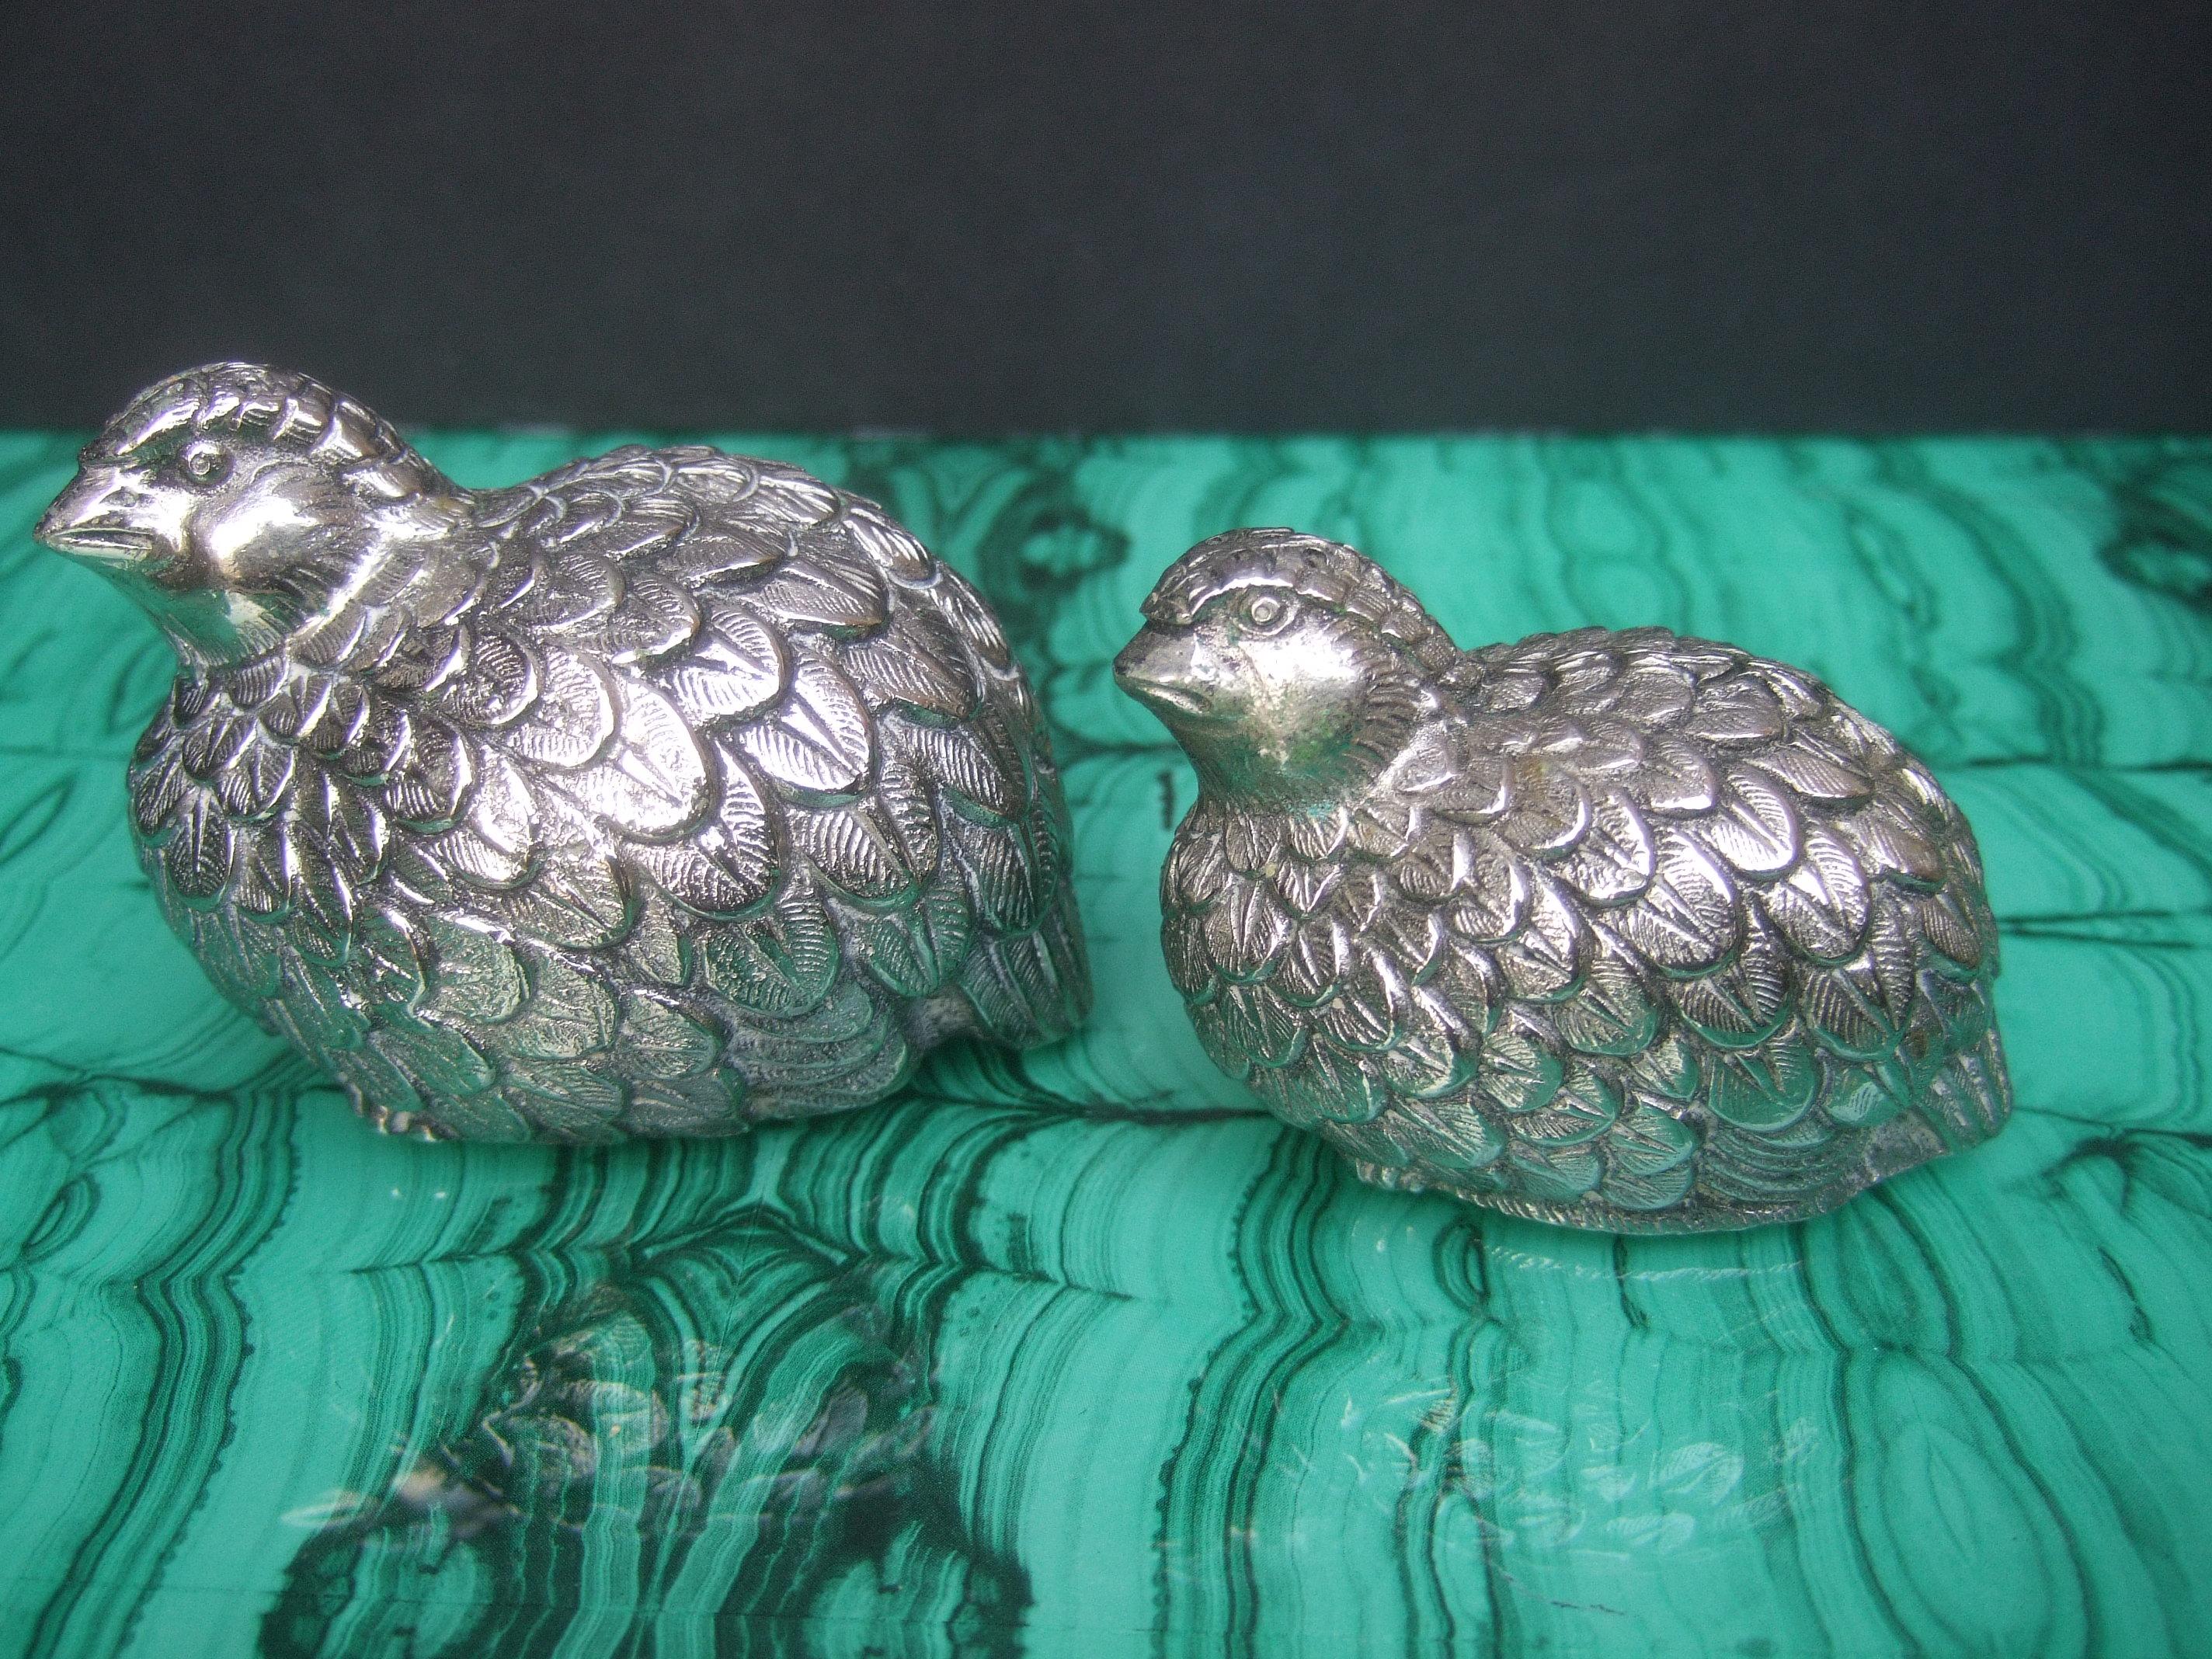 Elegant pair of Gucci Italian silver metal quail salt & pepper shakers c 1970s
The charming quails have etched & impressed detail that emulates their plumage  

Makes an elegant dining table decorative collectible
The pair of quails are graduated